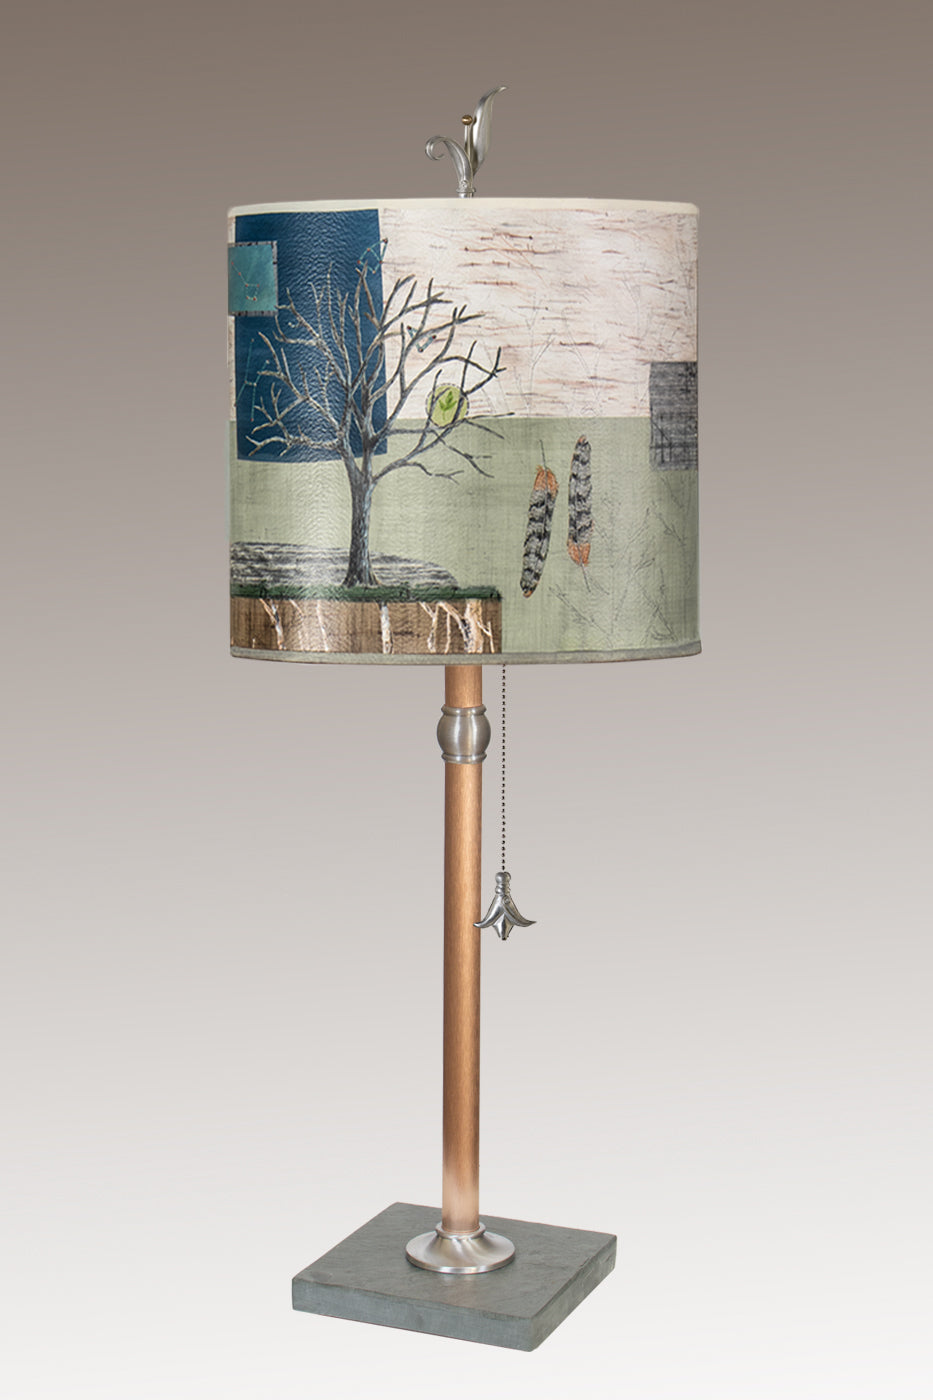 Copper Table Lamp with Medium Drum Shade in Wander in Field